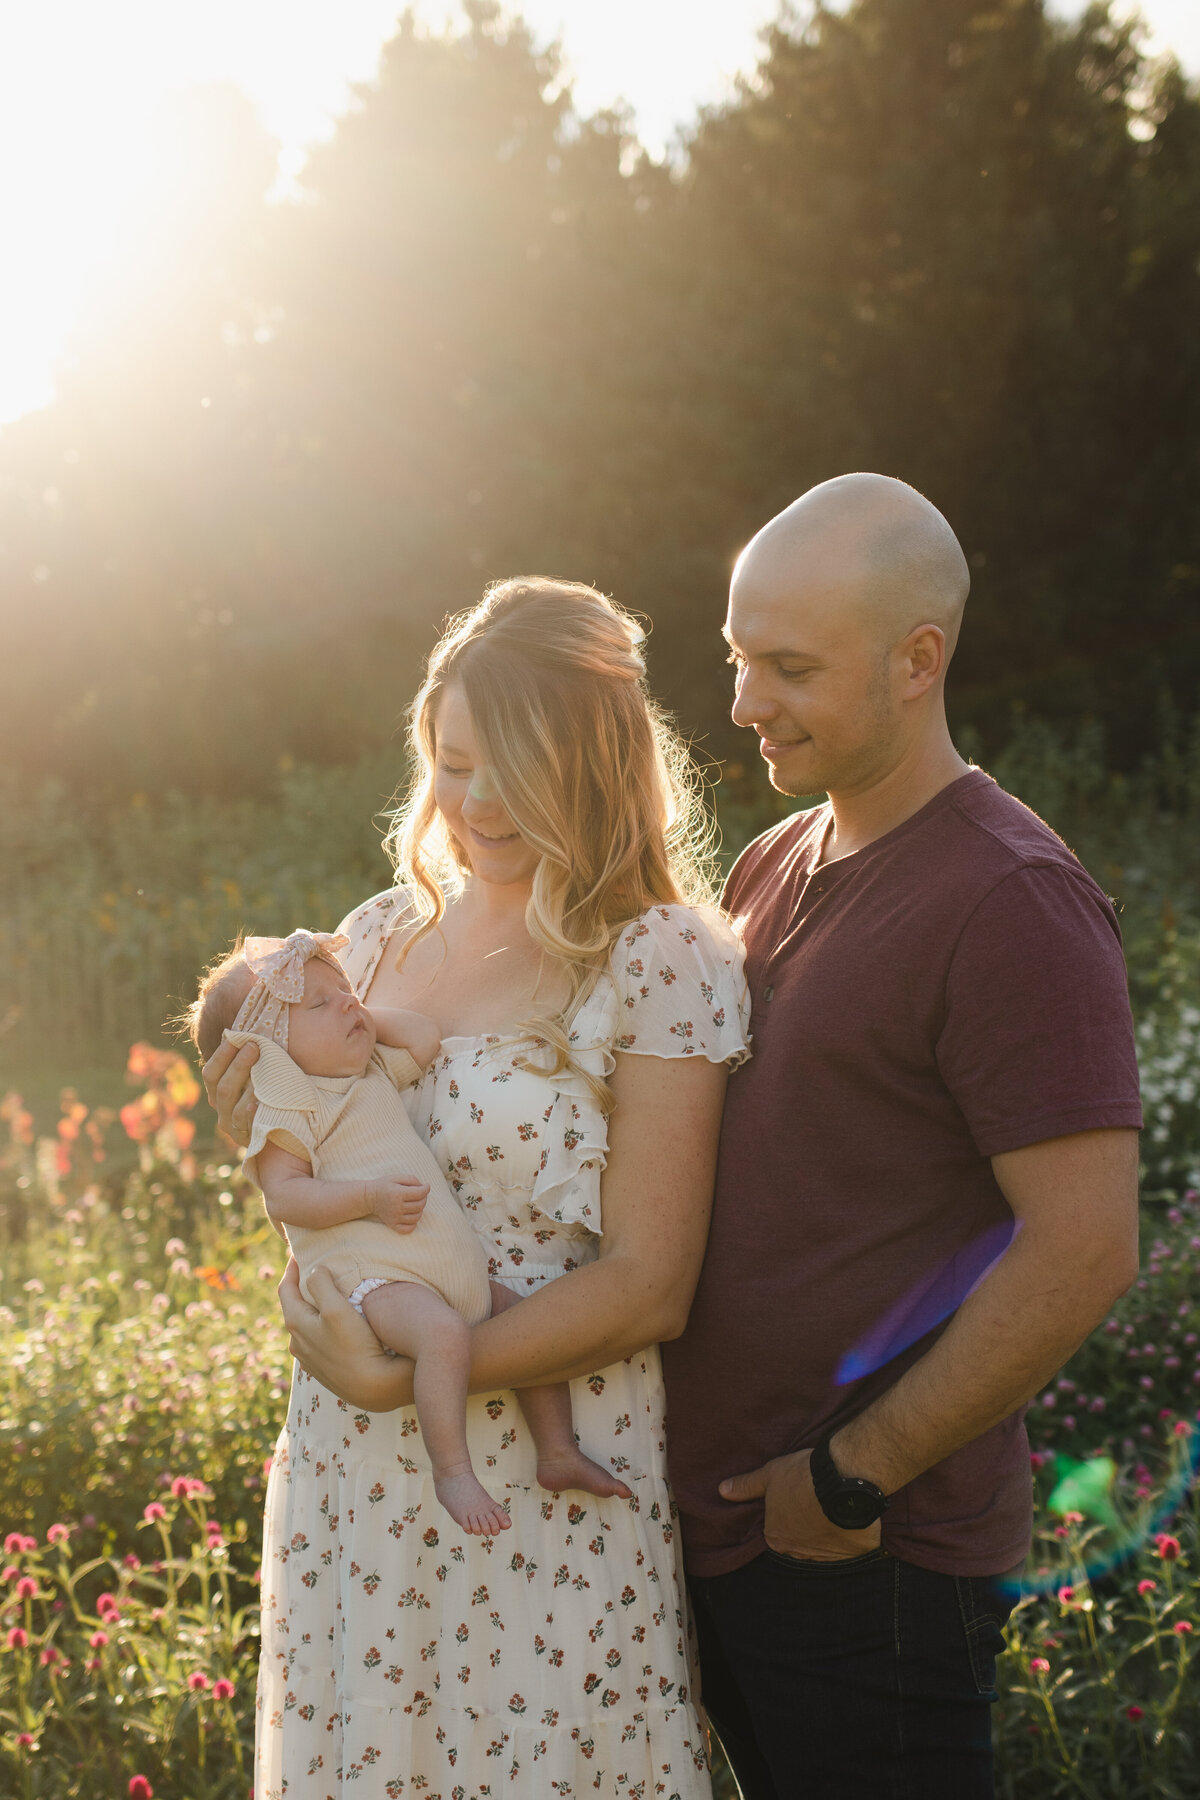 Hudson Valley Newborn Photographer captures a tender family moment with parents smiling at their newborn in a blooming field.